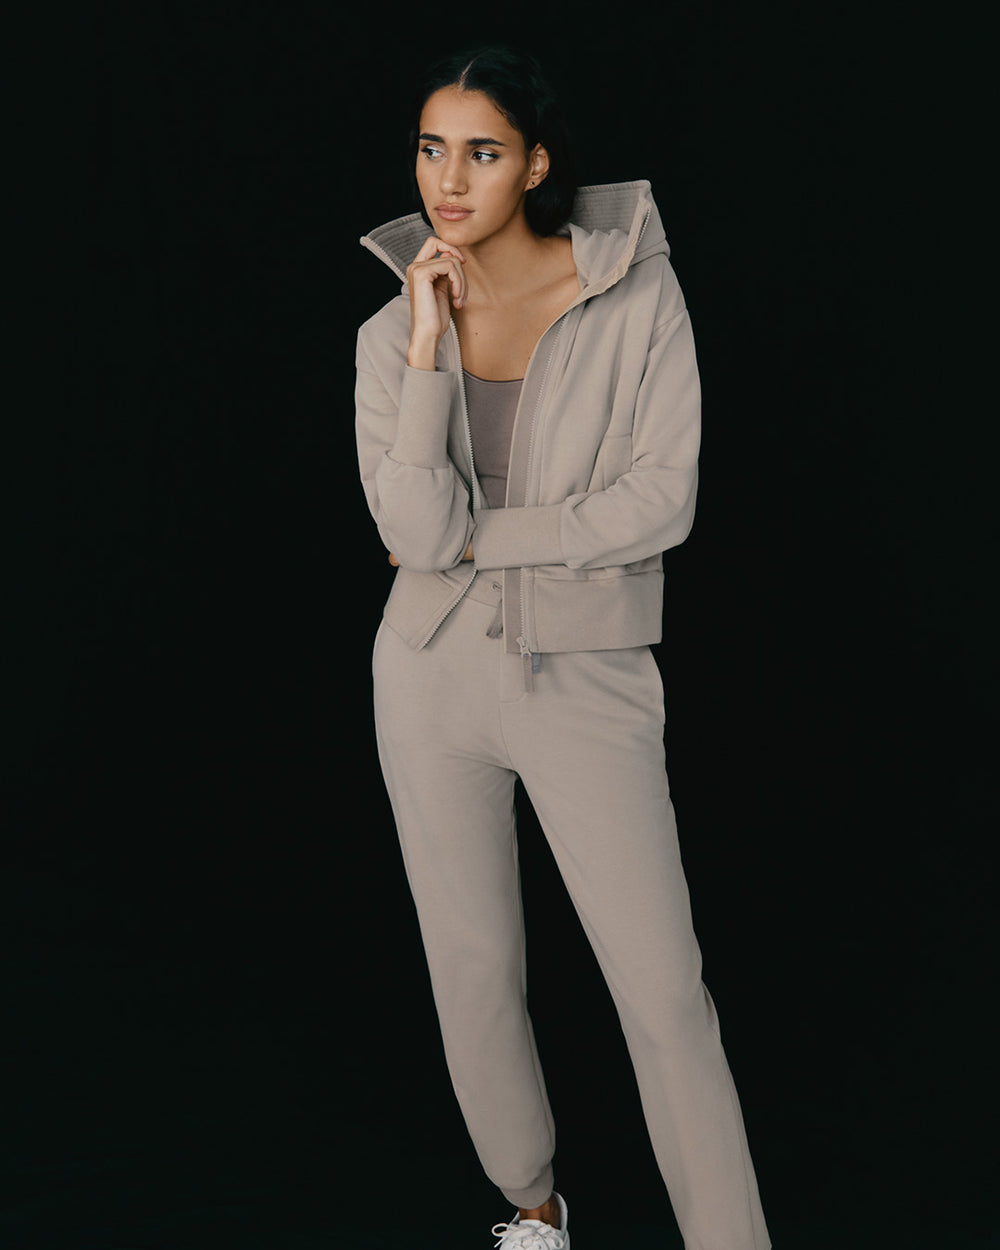 Woman in a tracksuit standing with hand on chin, looking to the side.